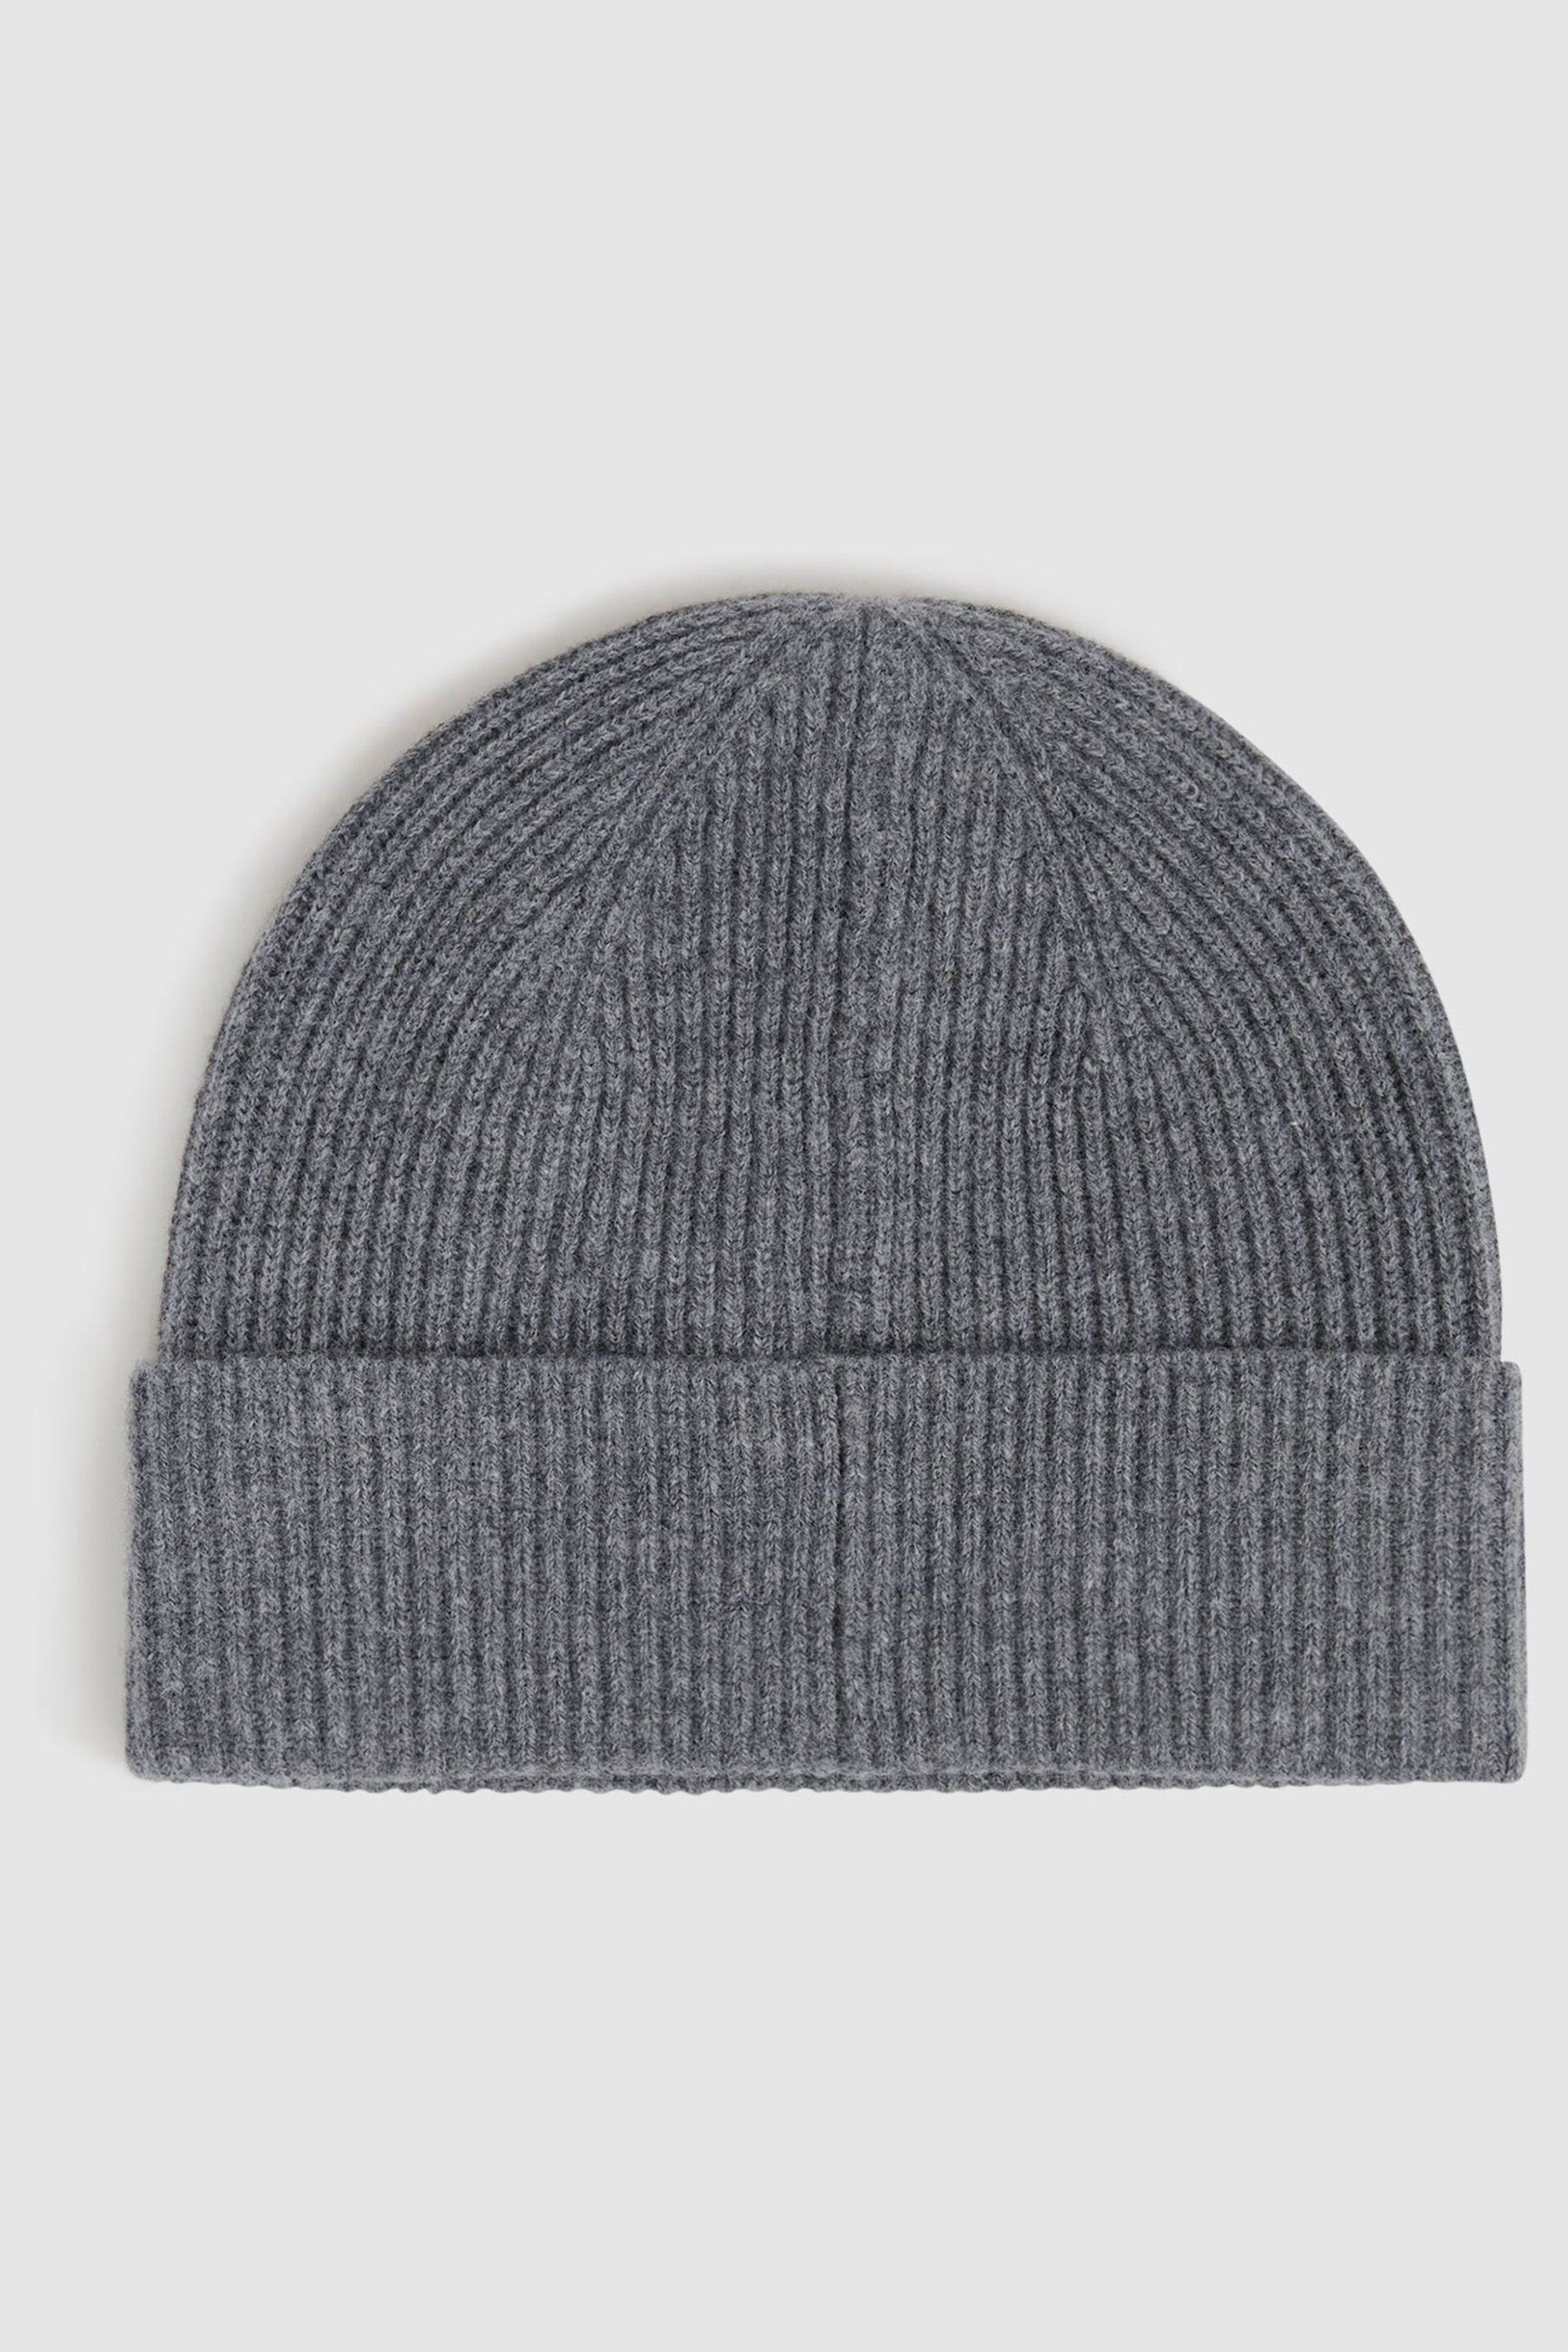 Reiss Charcoal Chaise Merino Wool Ribbed Beanie Hat - Image 3 of 4